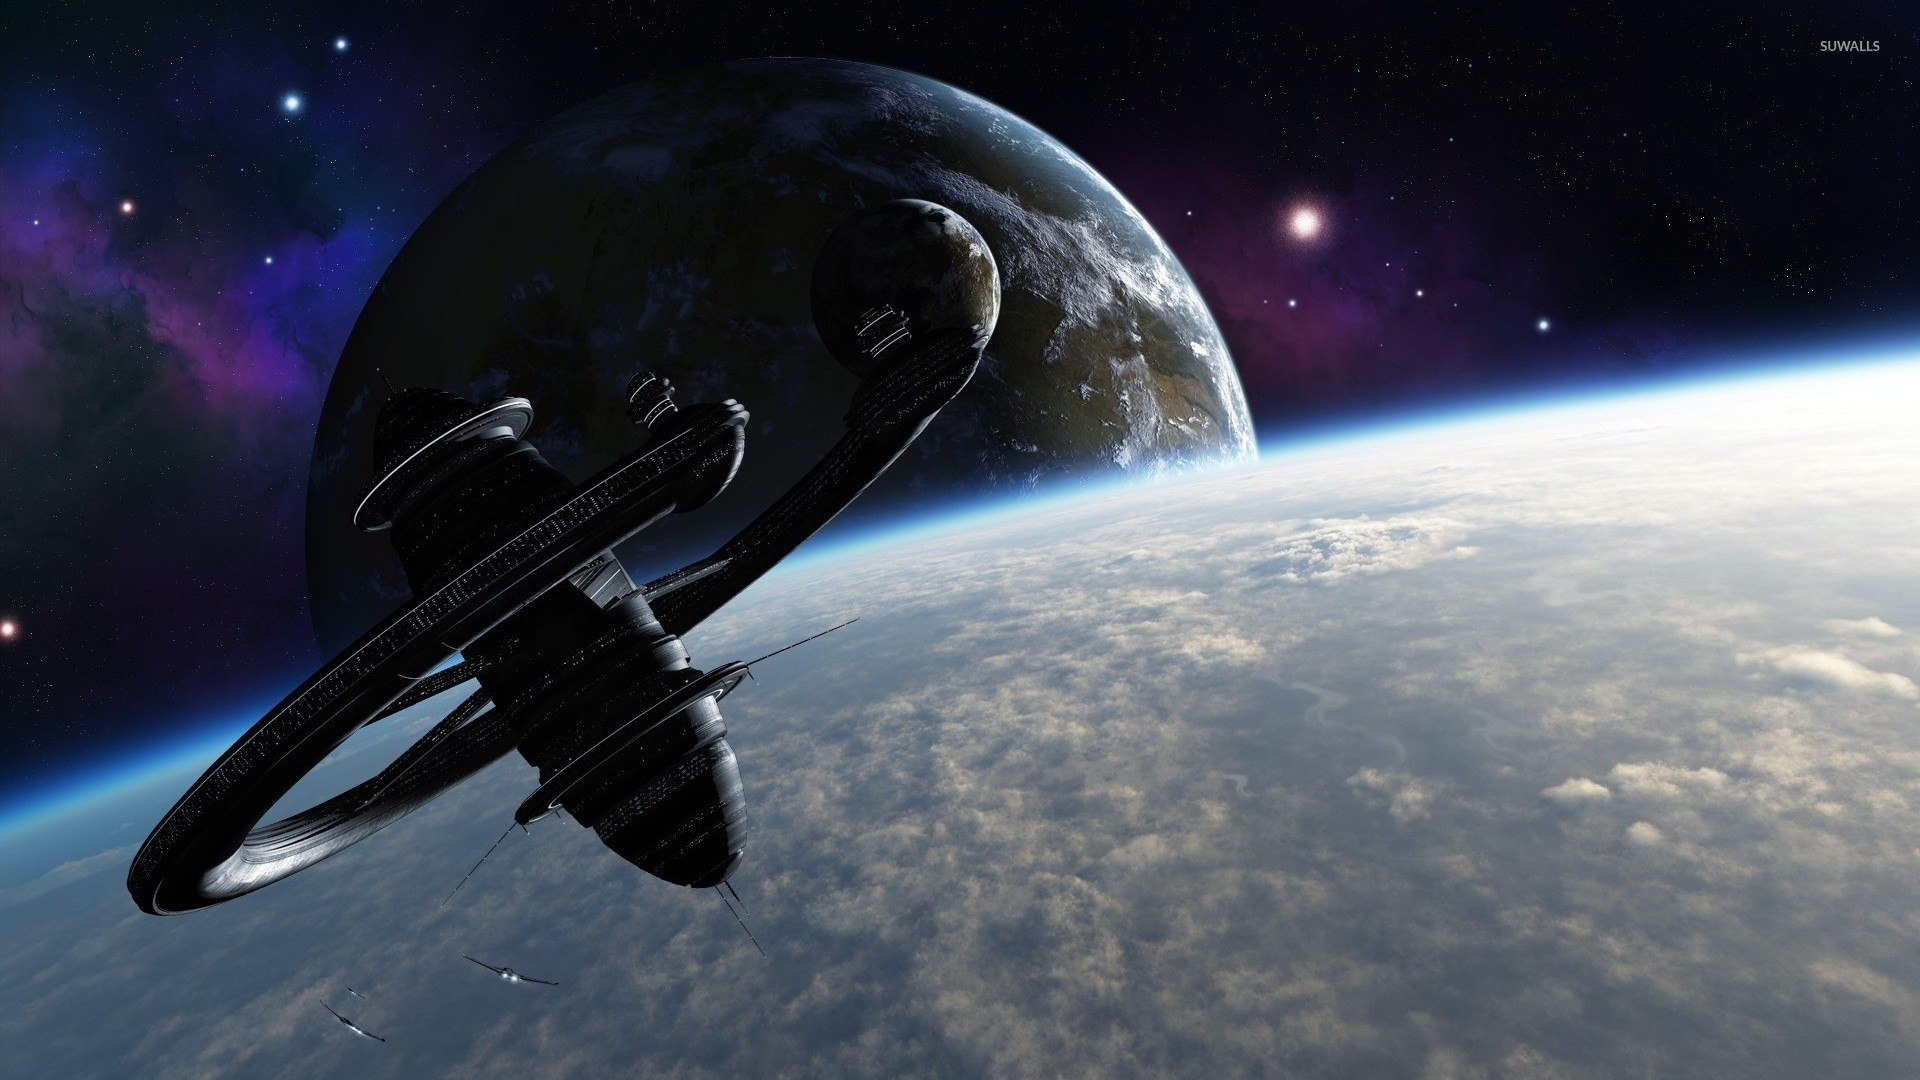 1920x1080 Space station [2] wallpaper